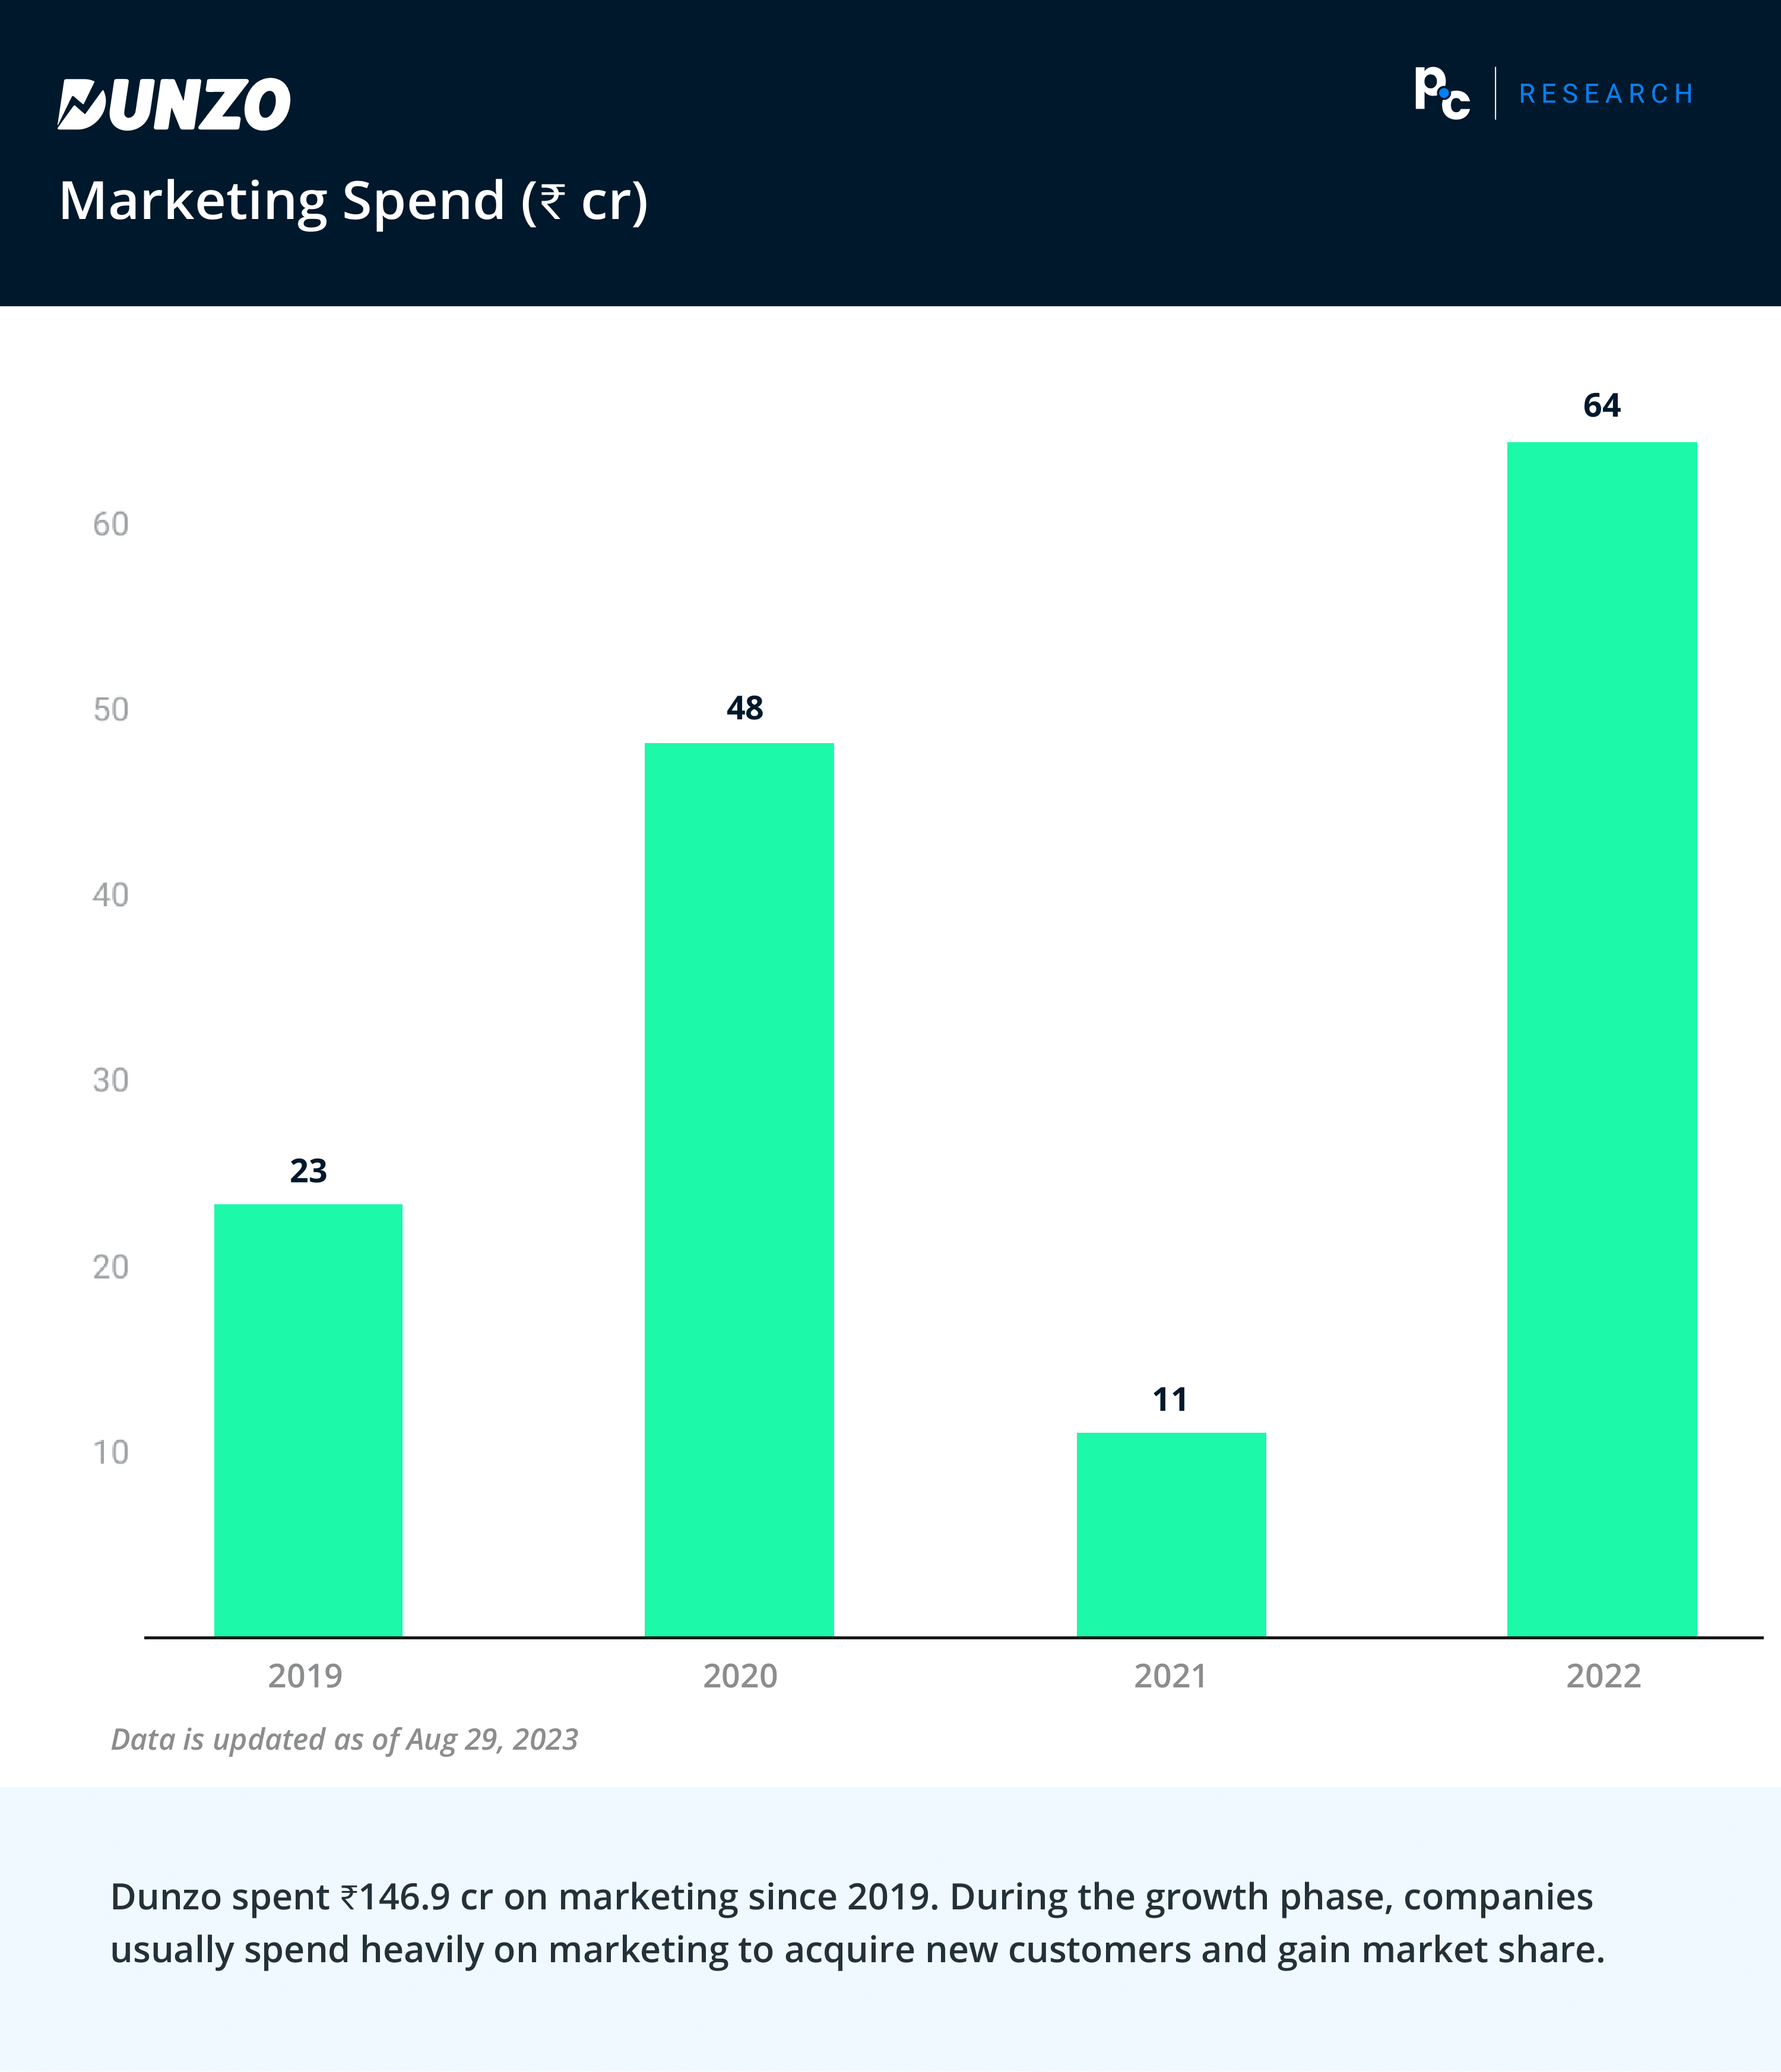 Dunzo 2023: Marketing Spend (₹ cr)
Dunzo has spent ₹146.9 cr on marketing since 2019. During the growth phase, companies usually spend heavily on marketing to acquire new customers and gain market share. 
